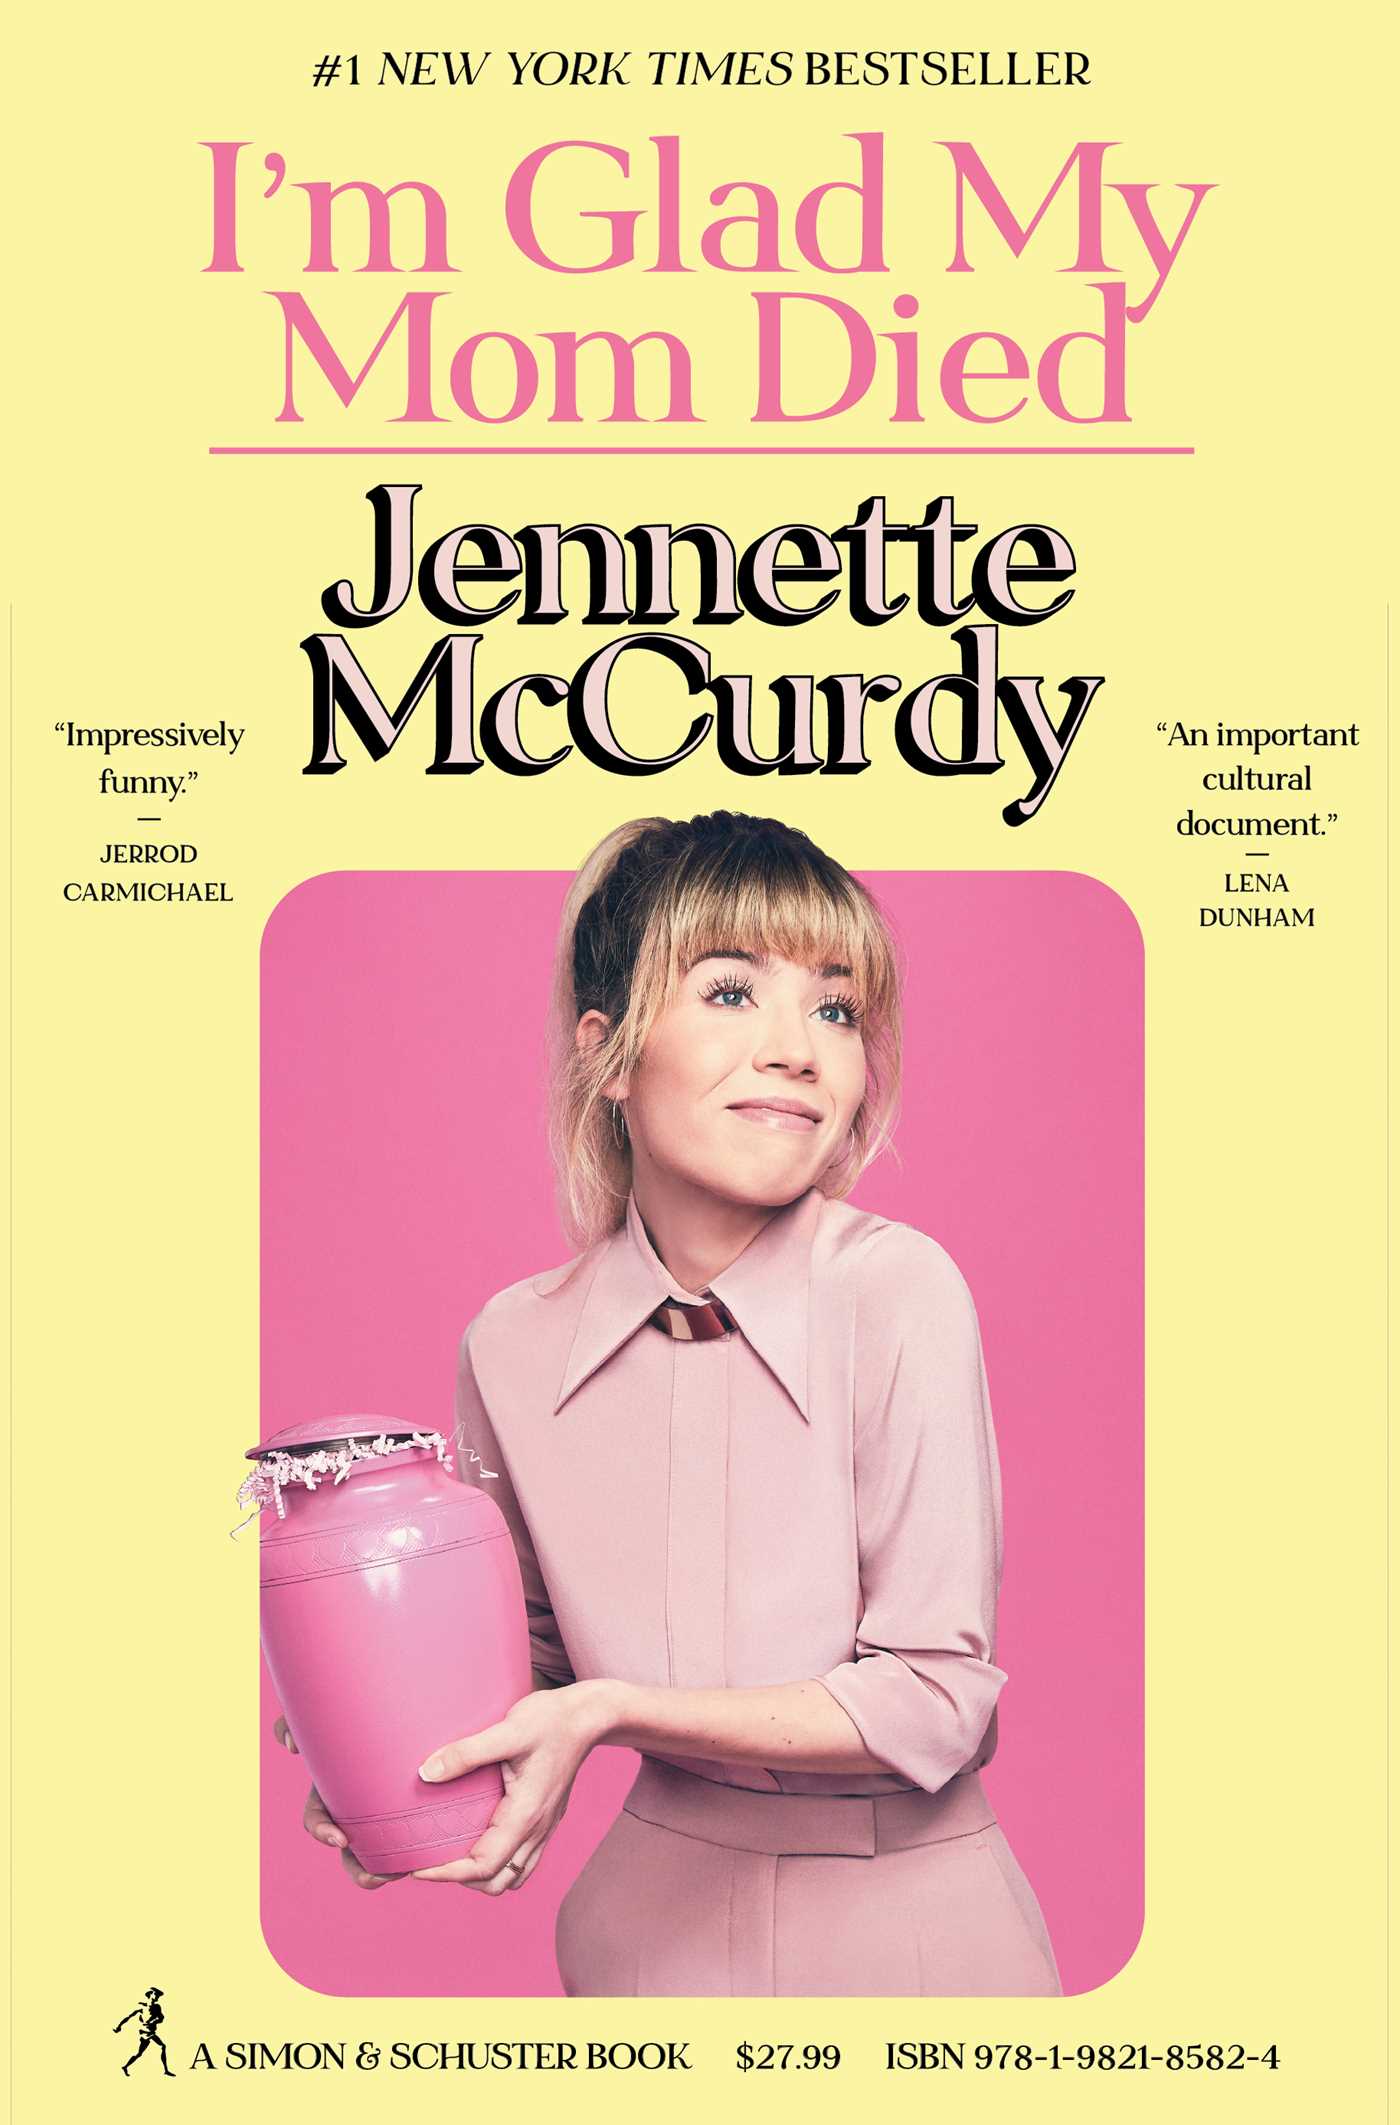 Book cover of I'm Glad My Mom Died, by Jenette McCurdy. A yellow background with the author standing in front of a pink square holding a pink urn